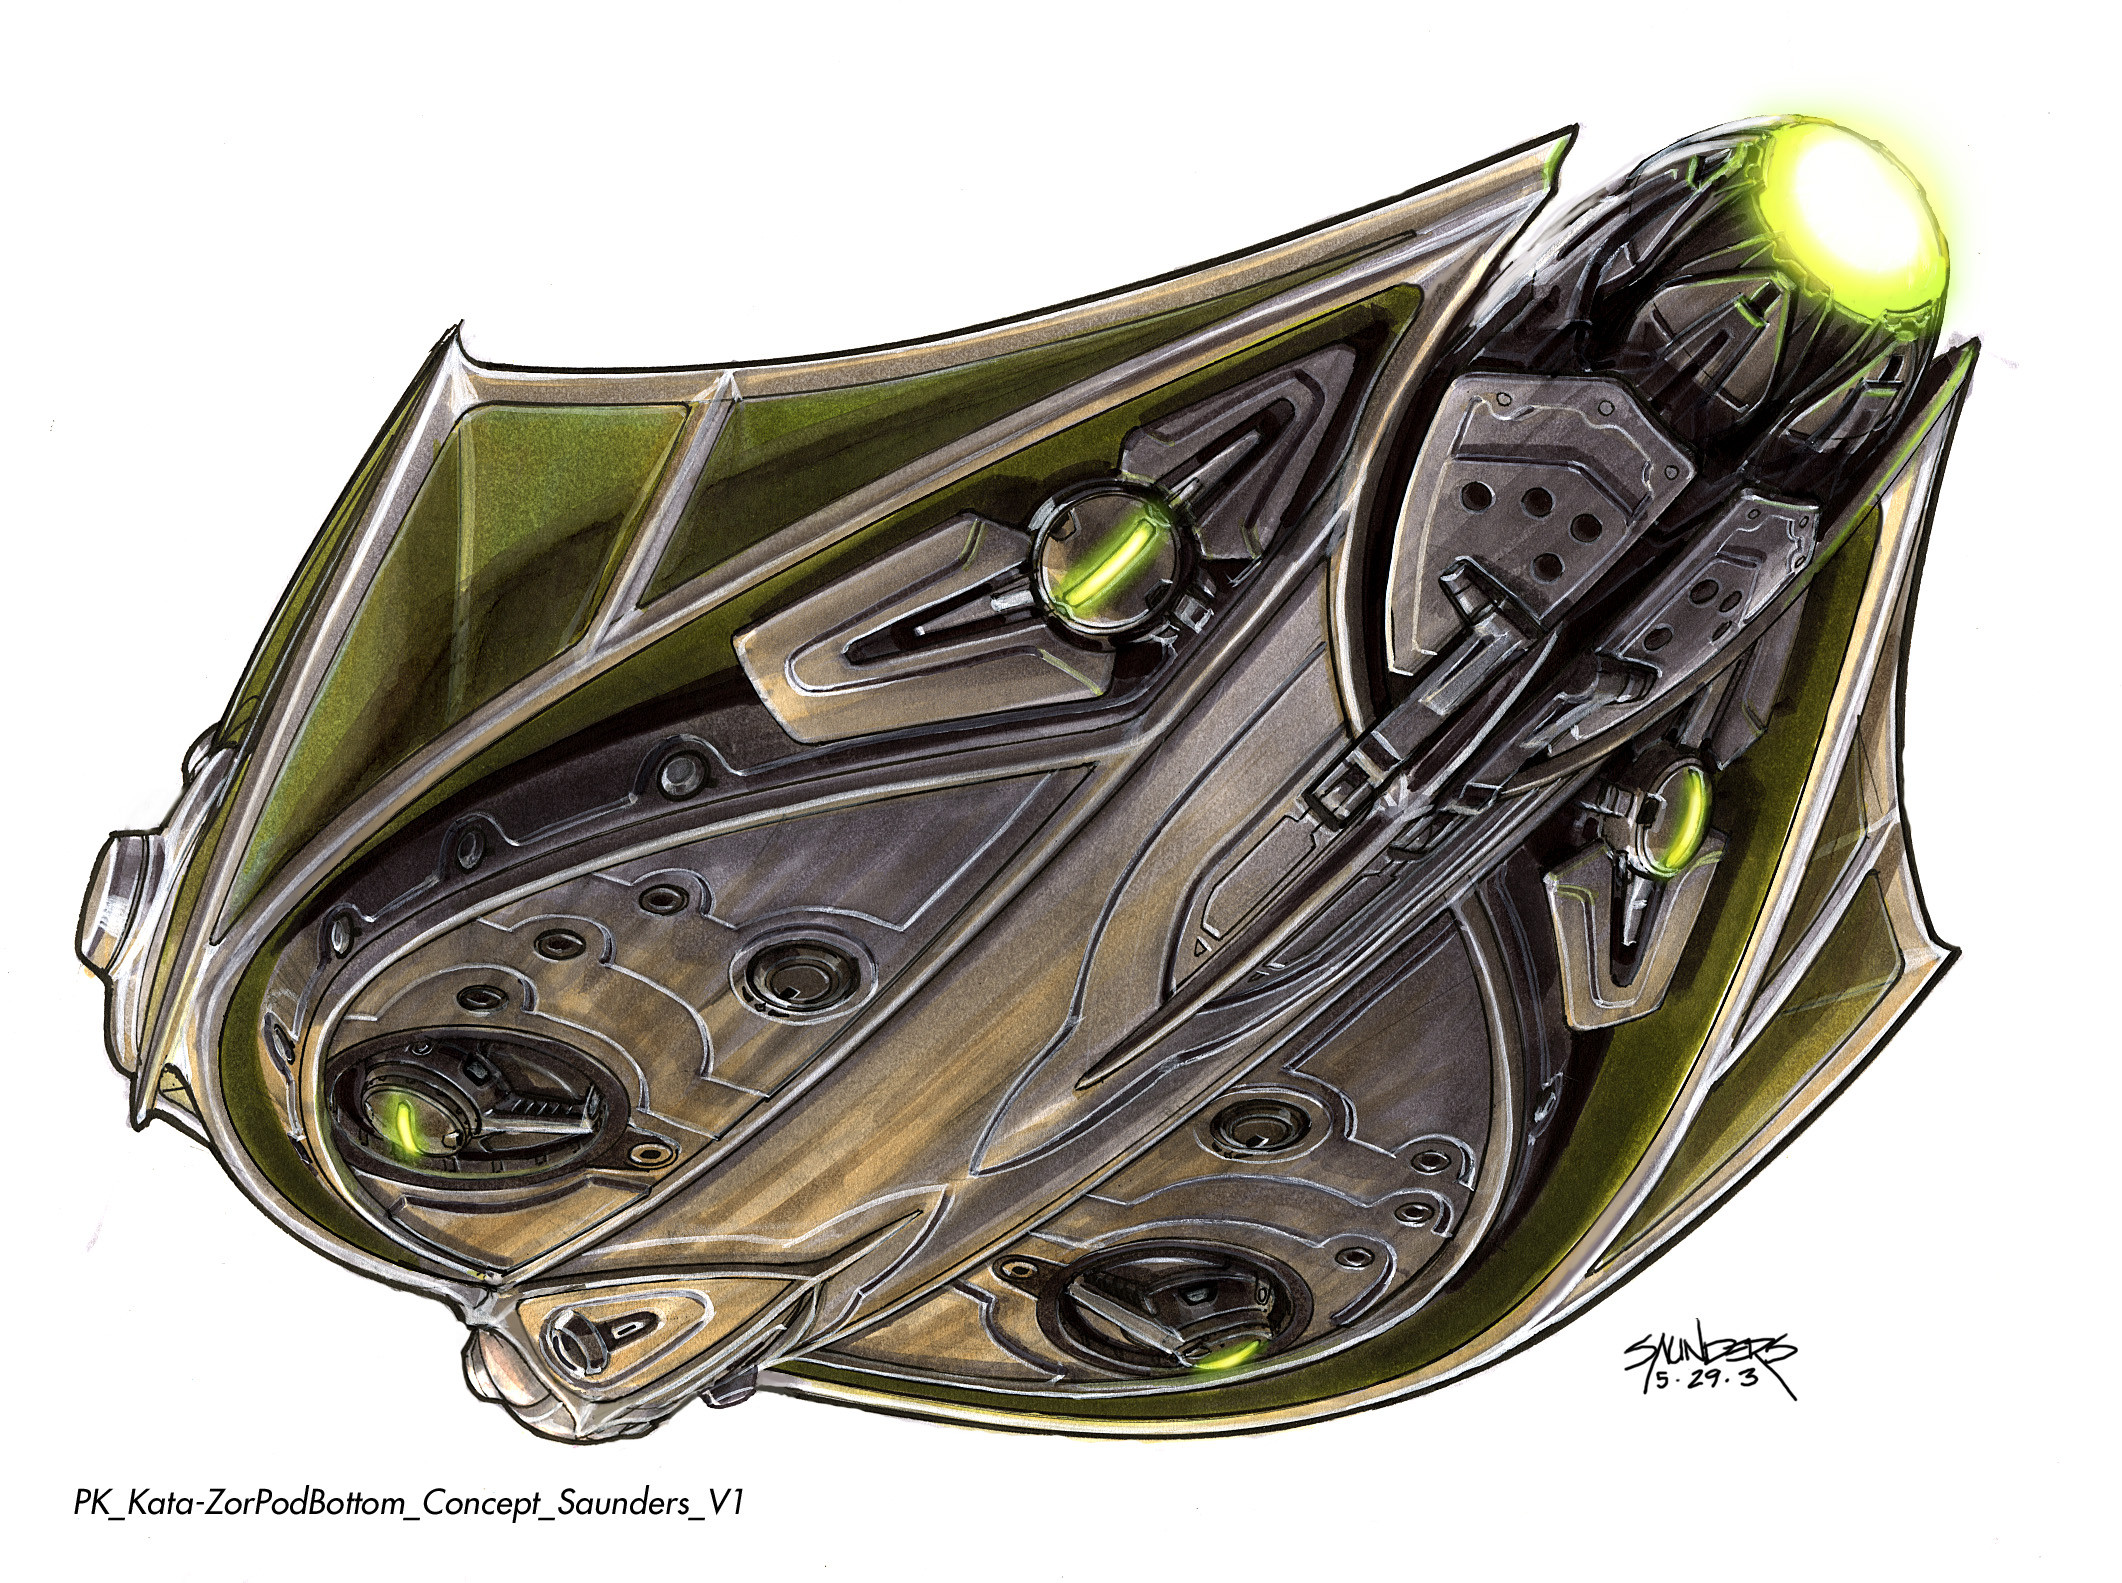 First version of the underside. I liked the idea of a turtle-shell like construction, with vectoring emitters below for landing.